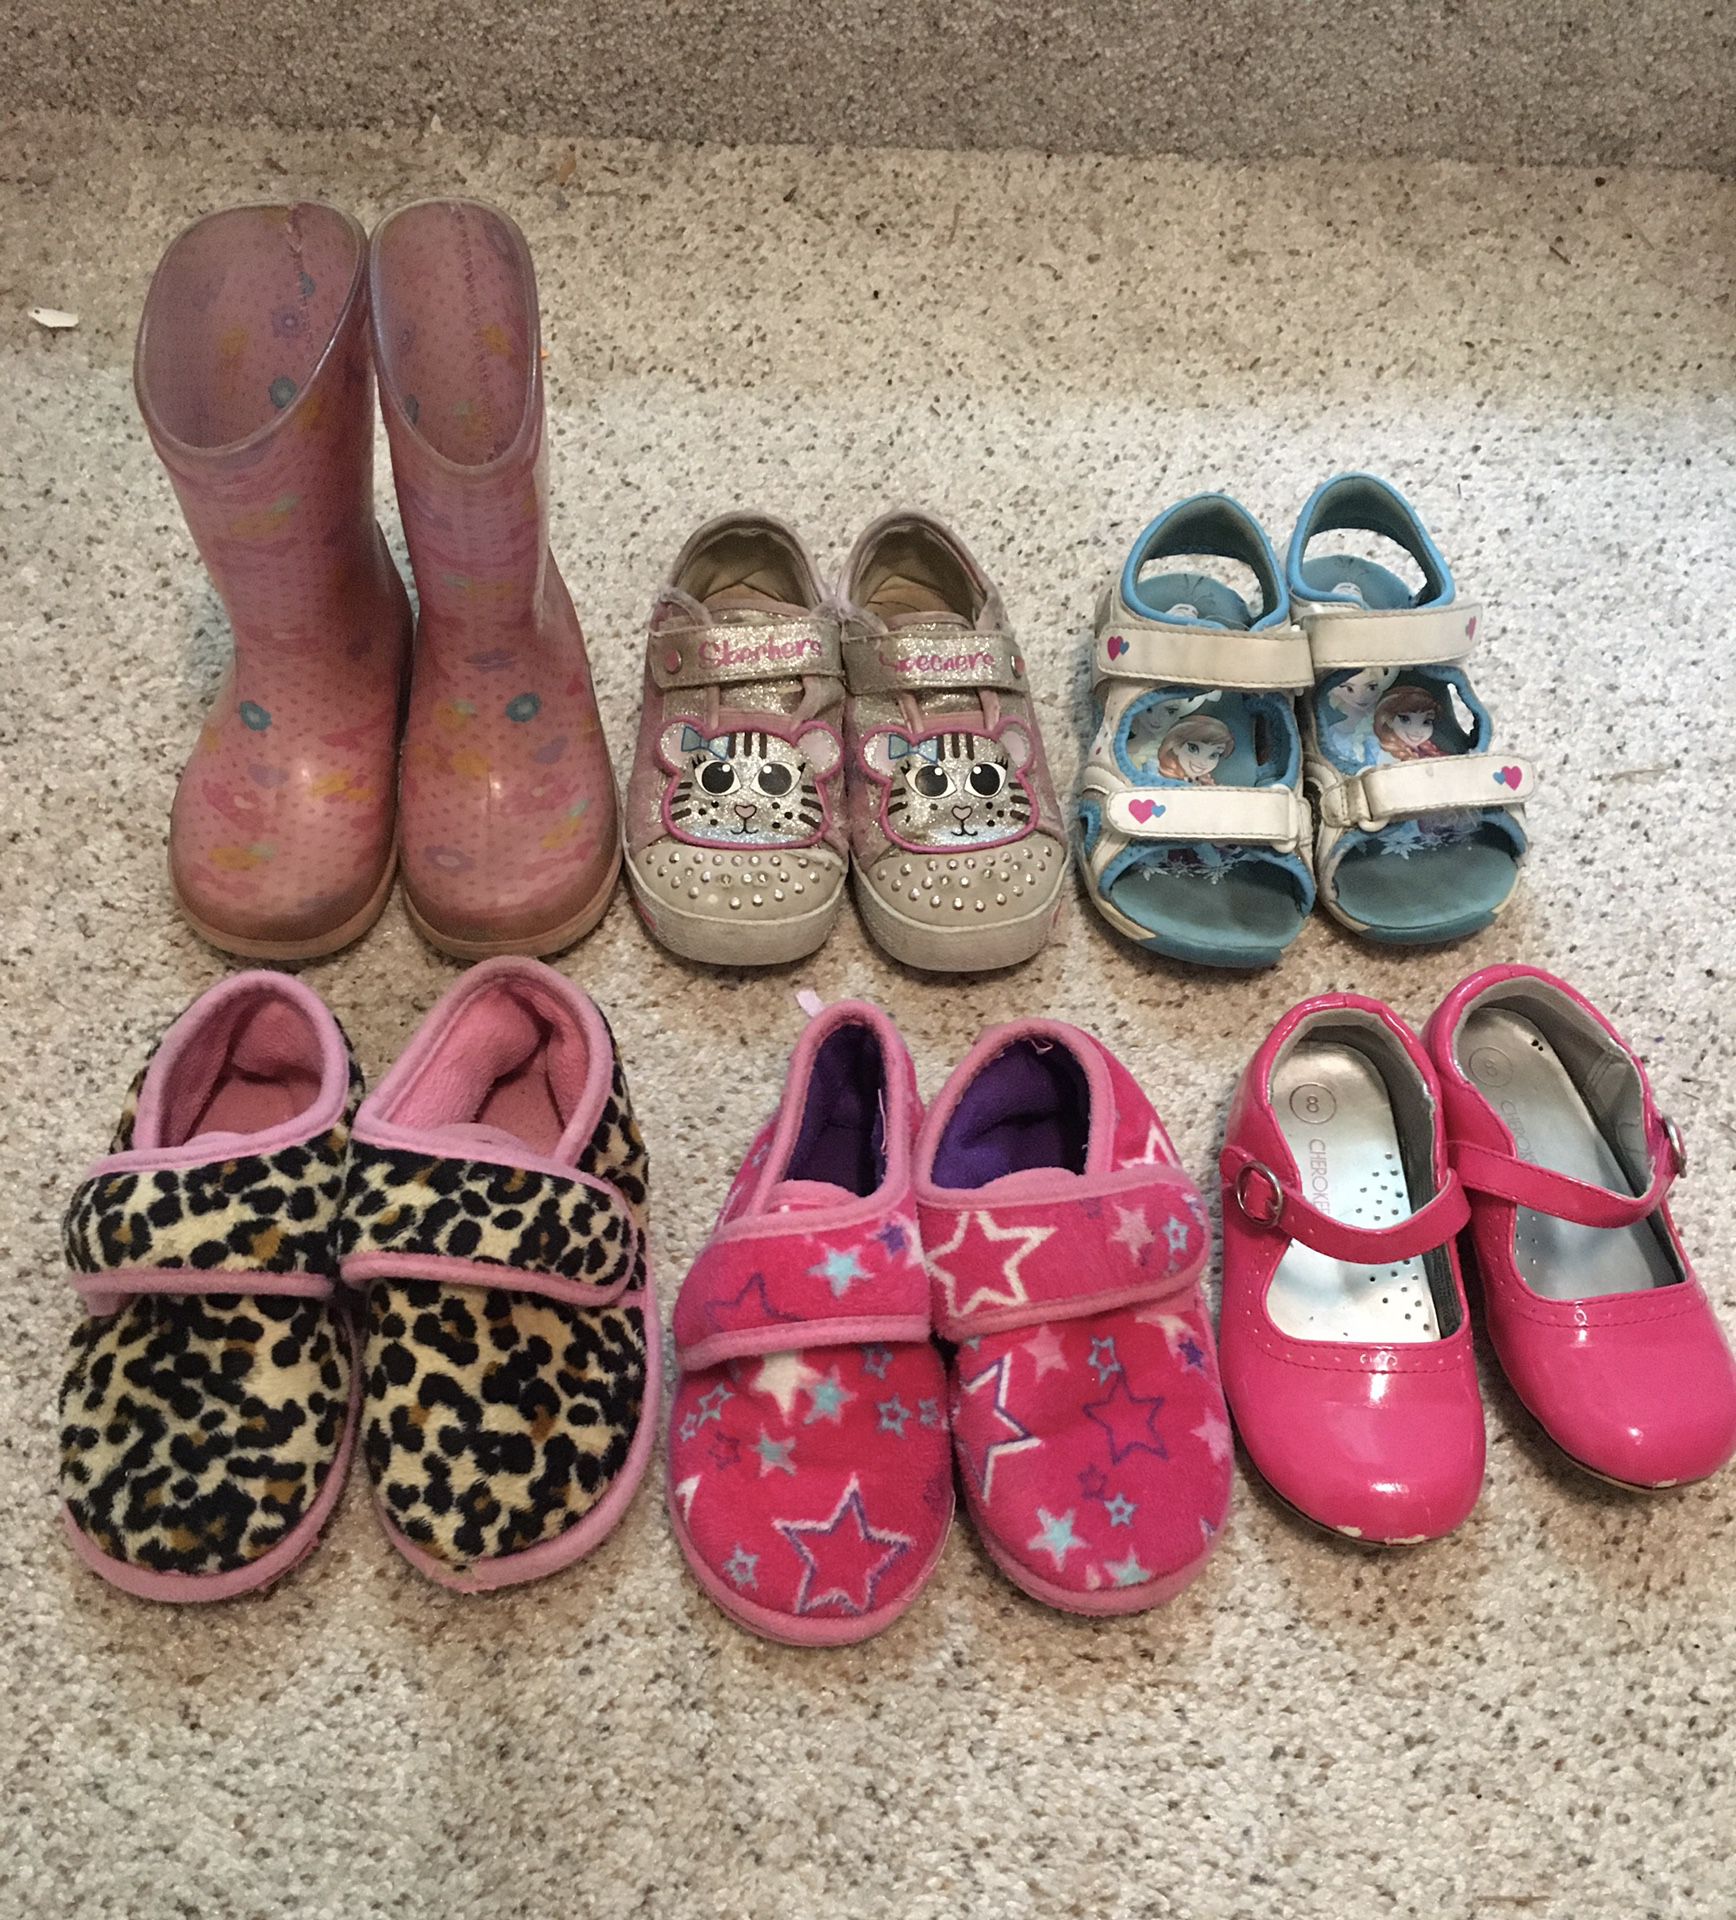 Toddler Girls size 8 Shoes